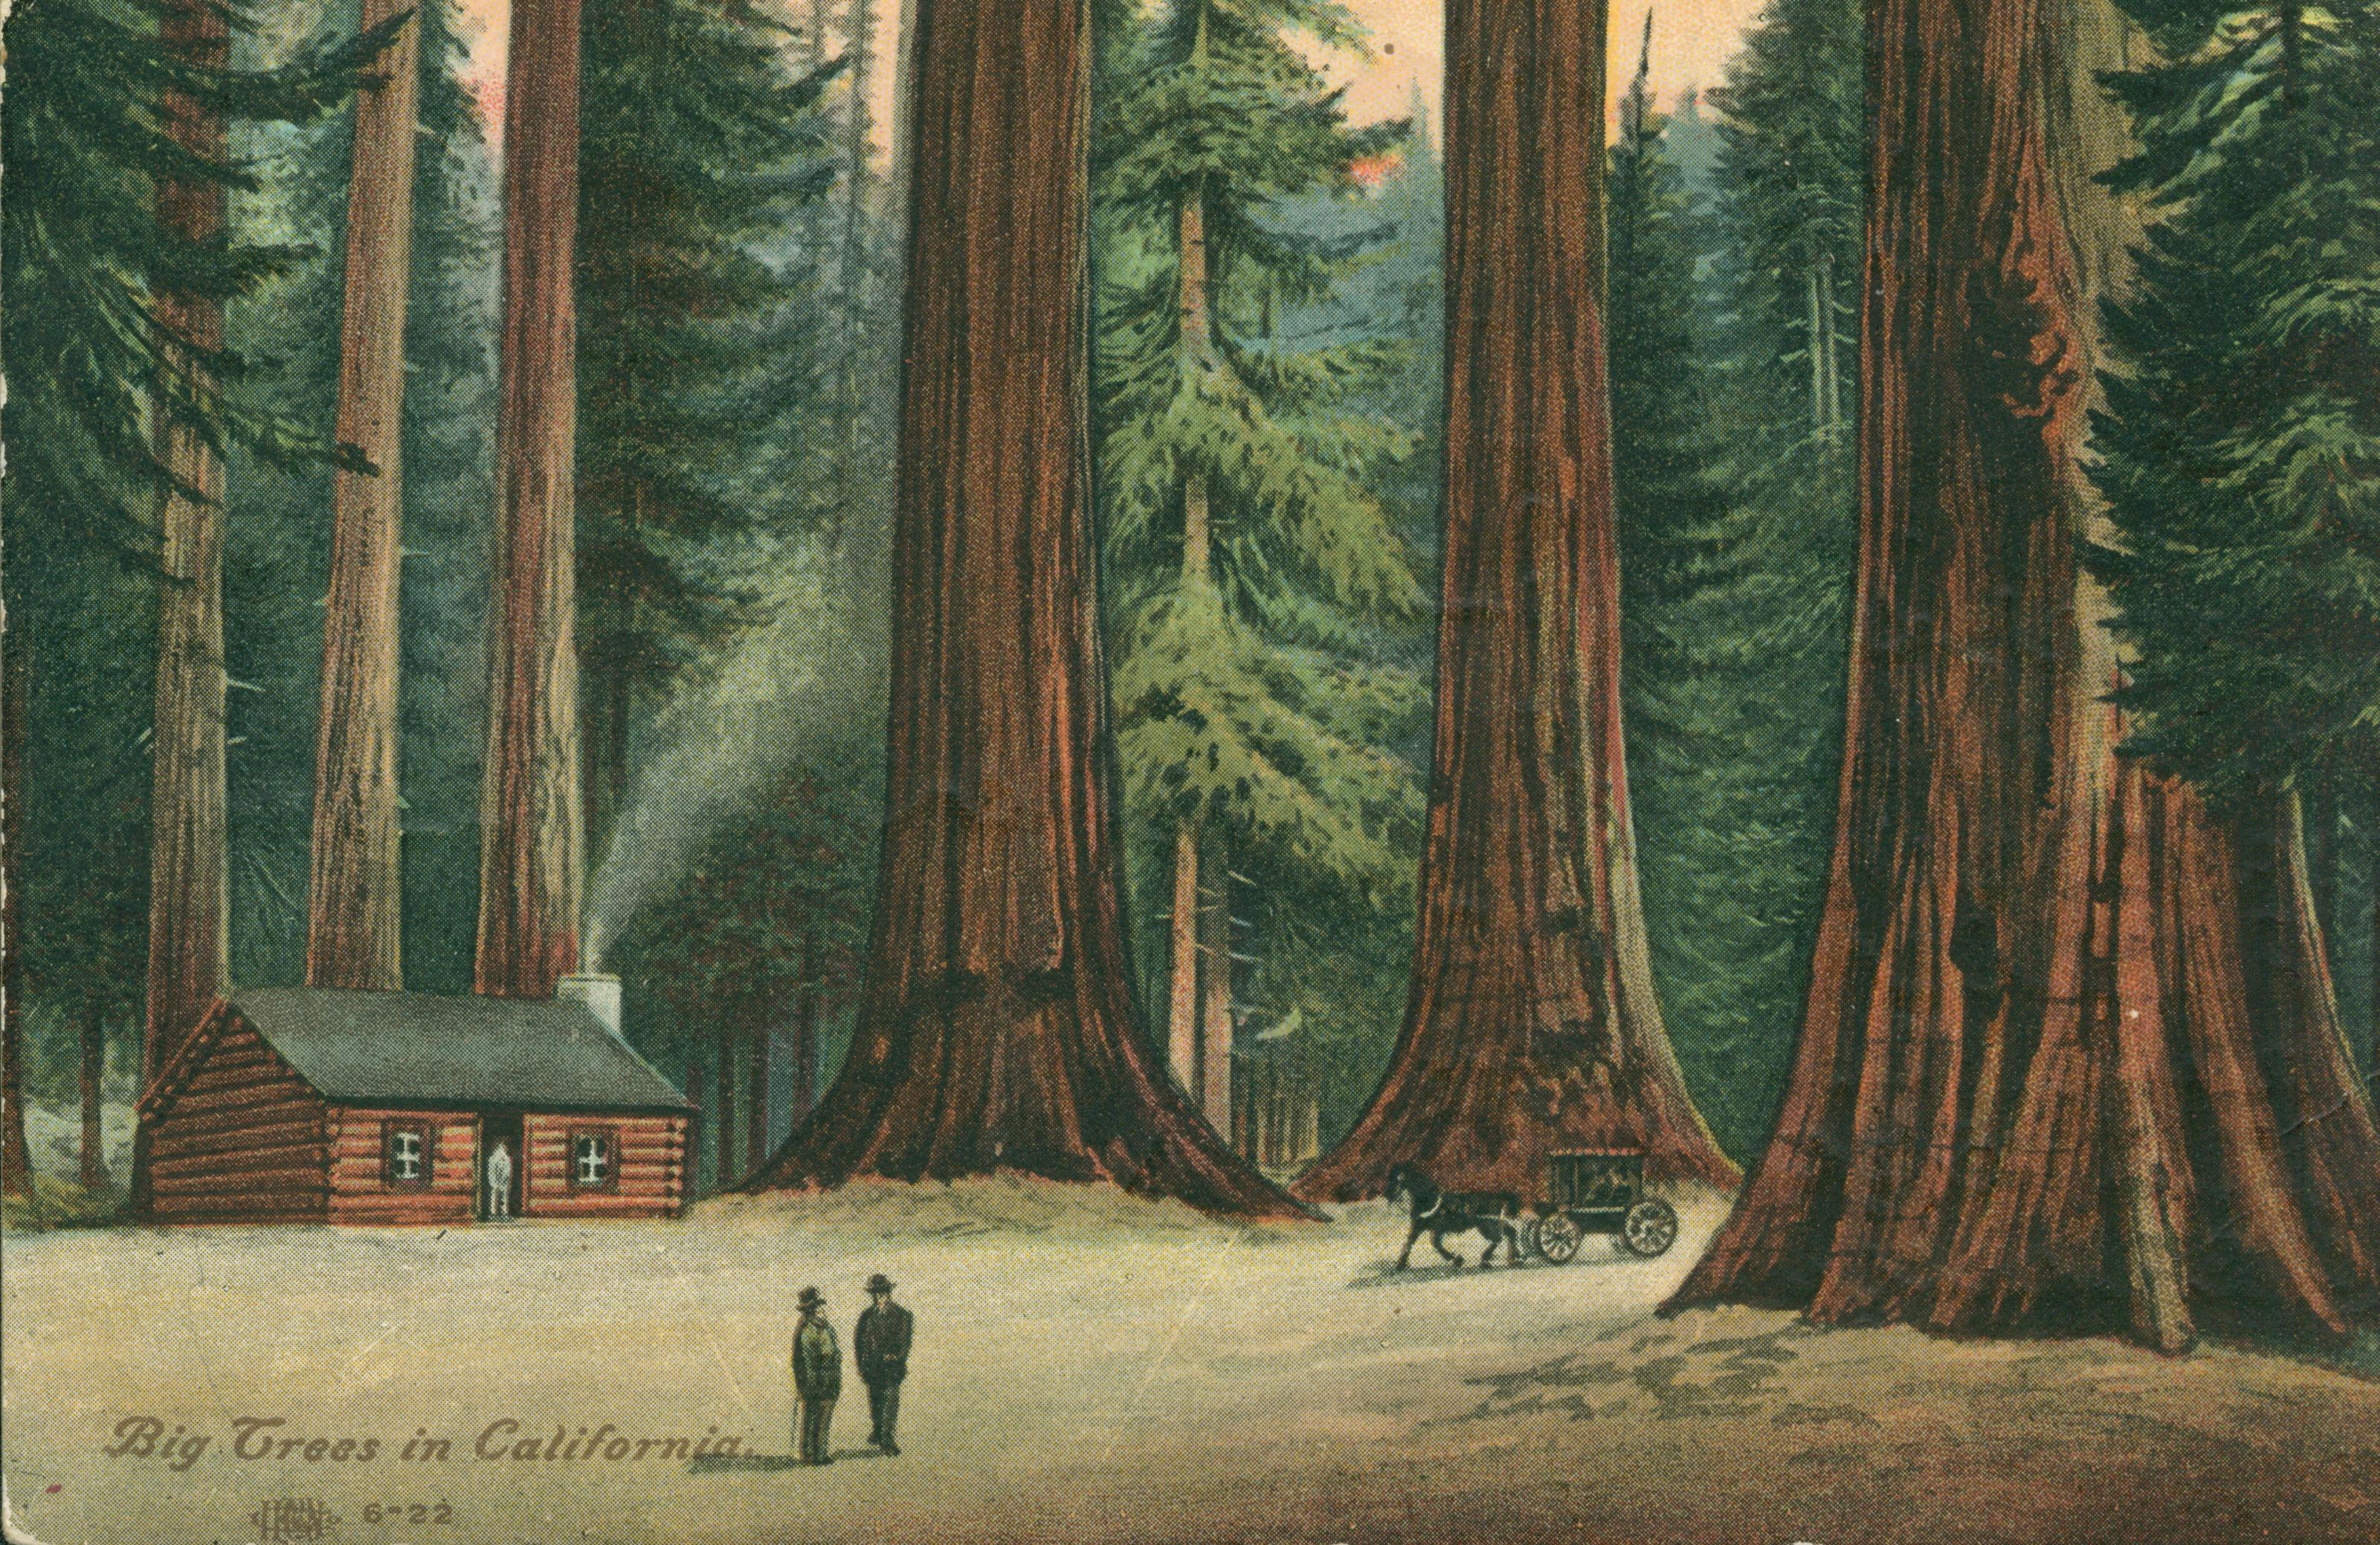 Shows a cabin and a coach amongst giant sequoias with two men standing in the foreground